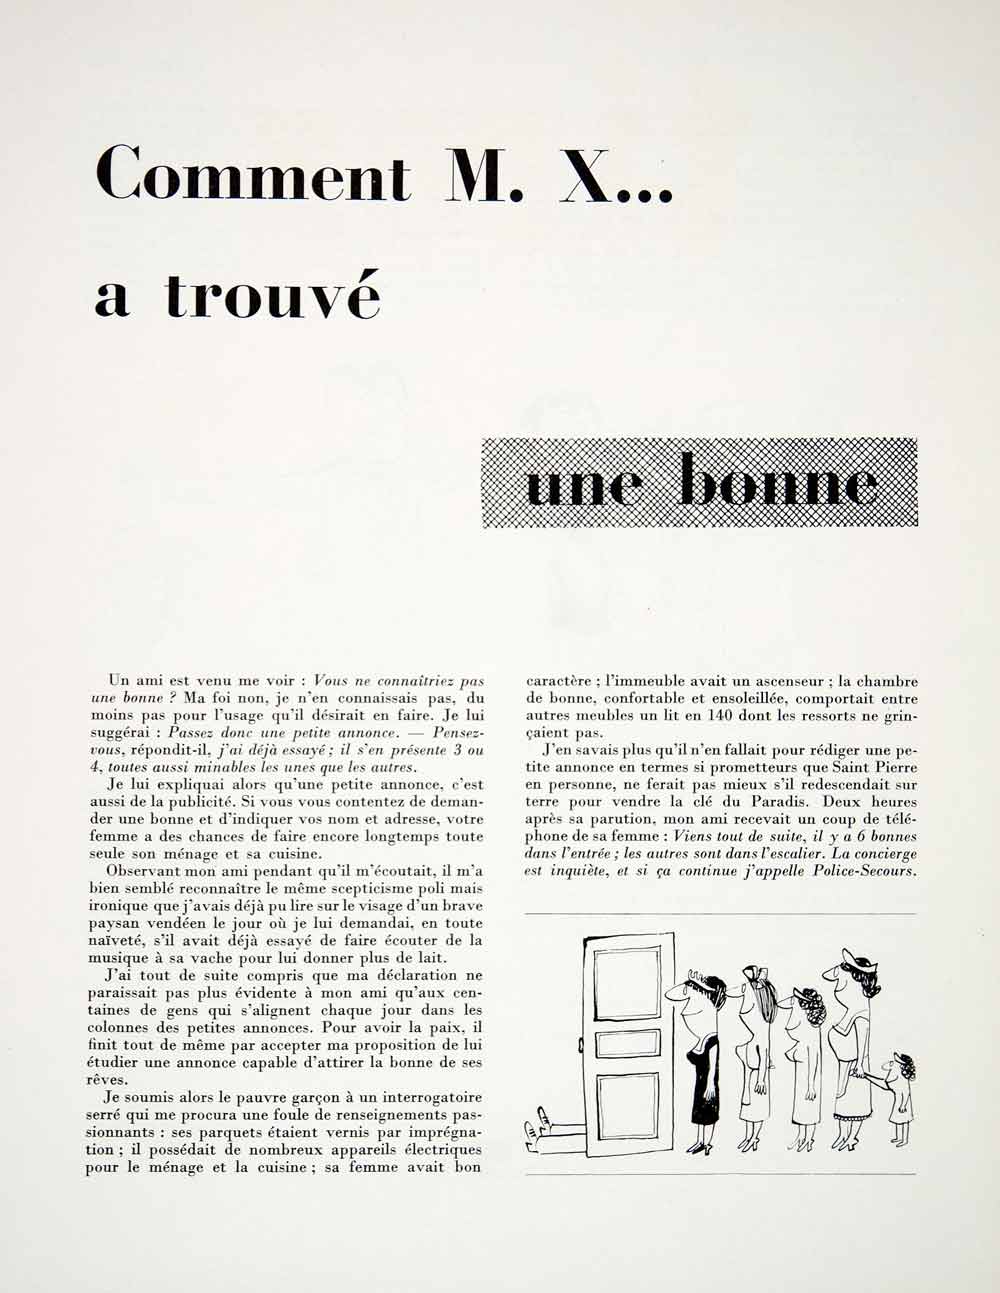 1956 Article Celerier Housemaid Advertising Cautionary Tale Advice French VEN7